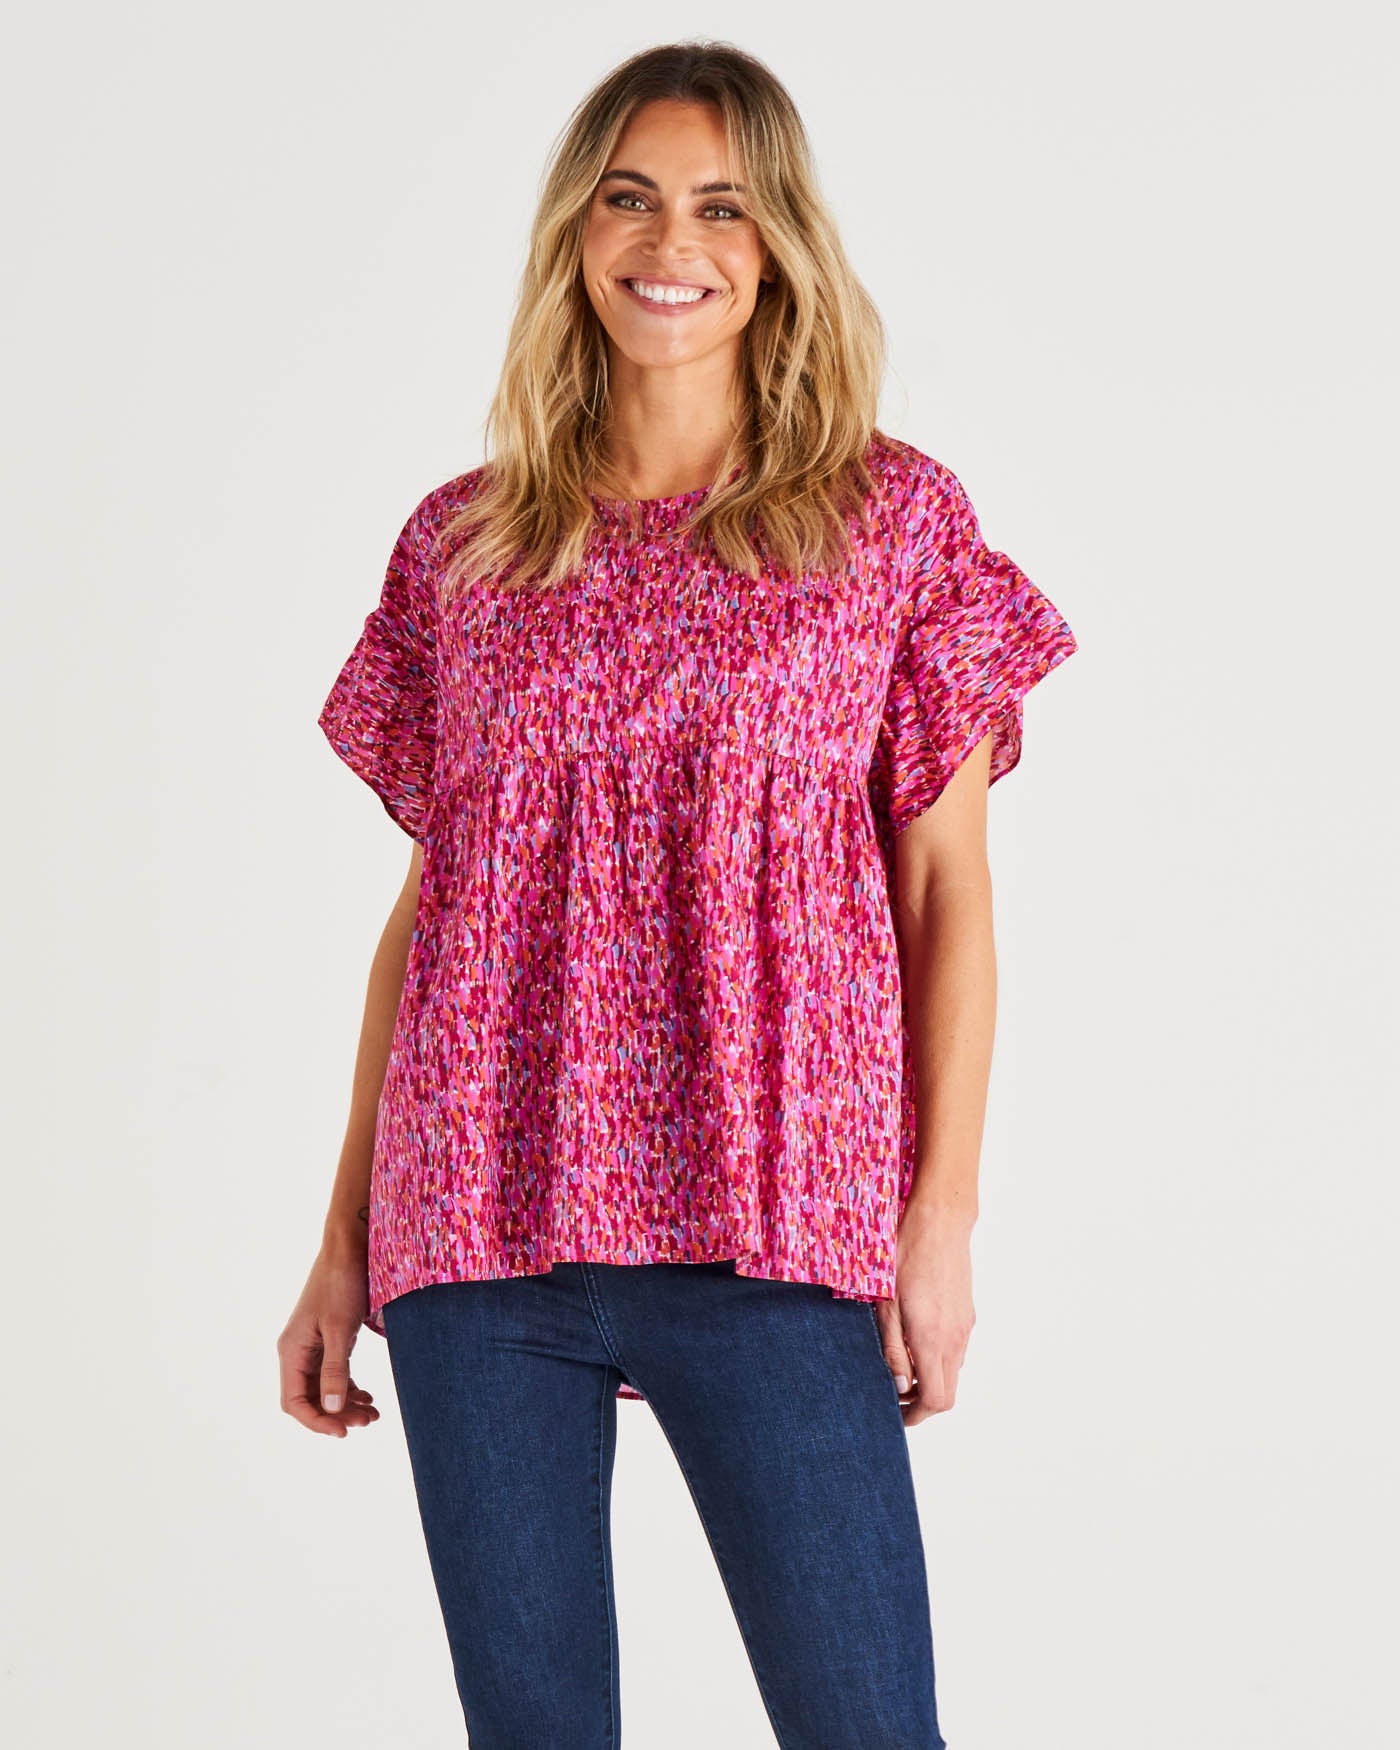 Jameson Relaxed Frill Sleeve Cotton Blouse - Multi Colour Pink Print